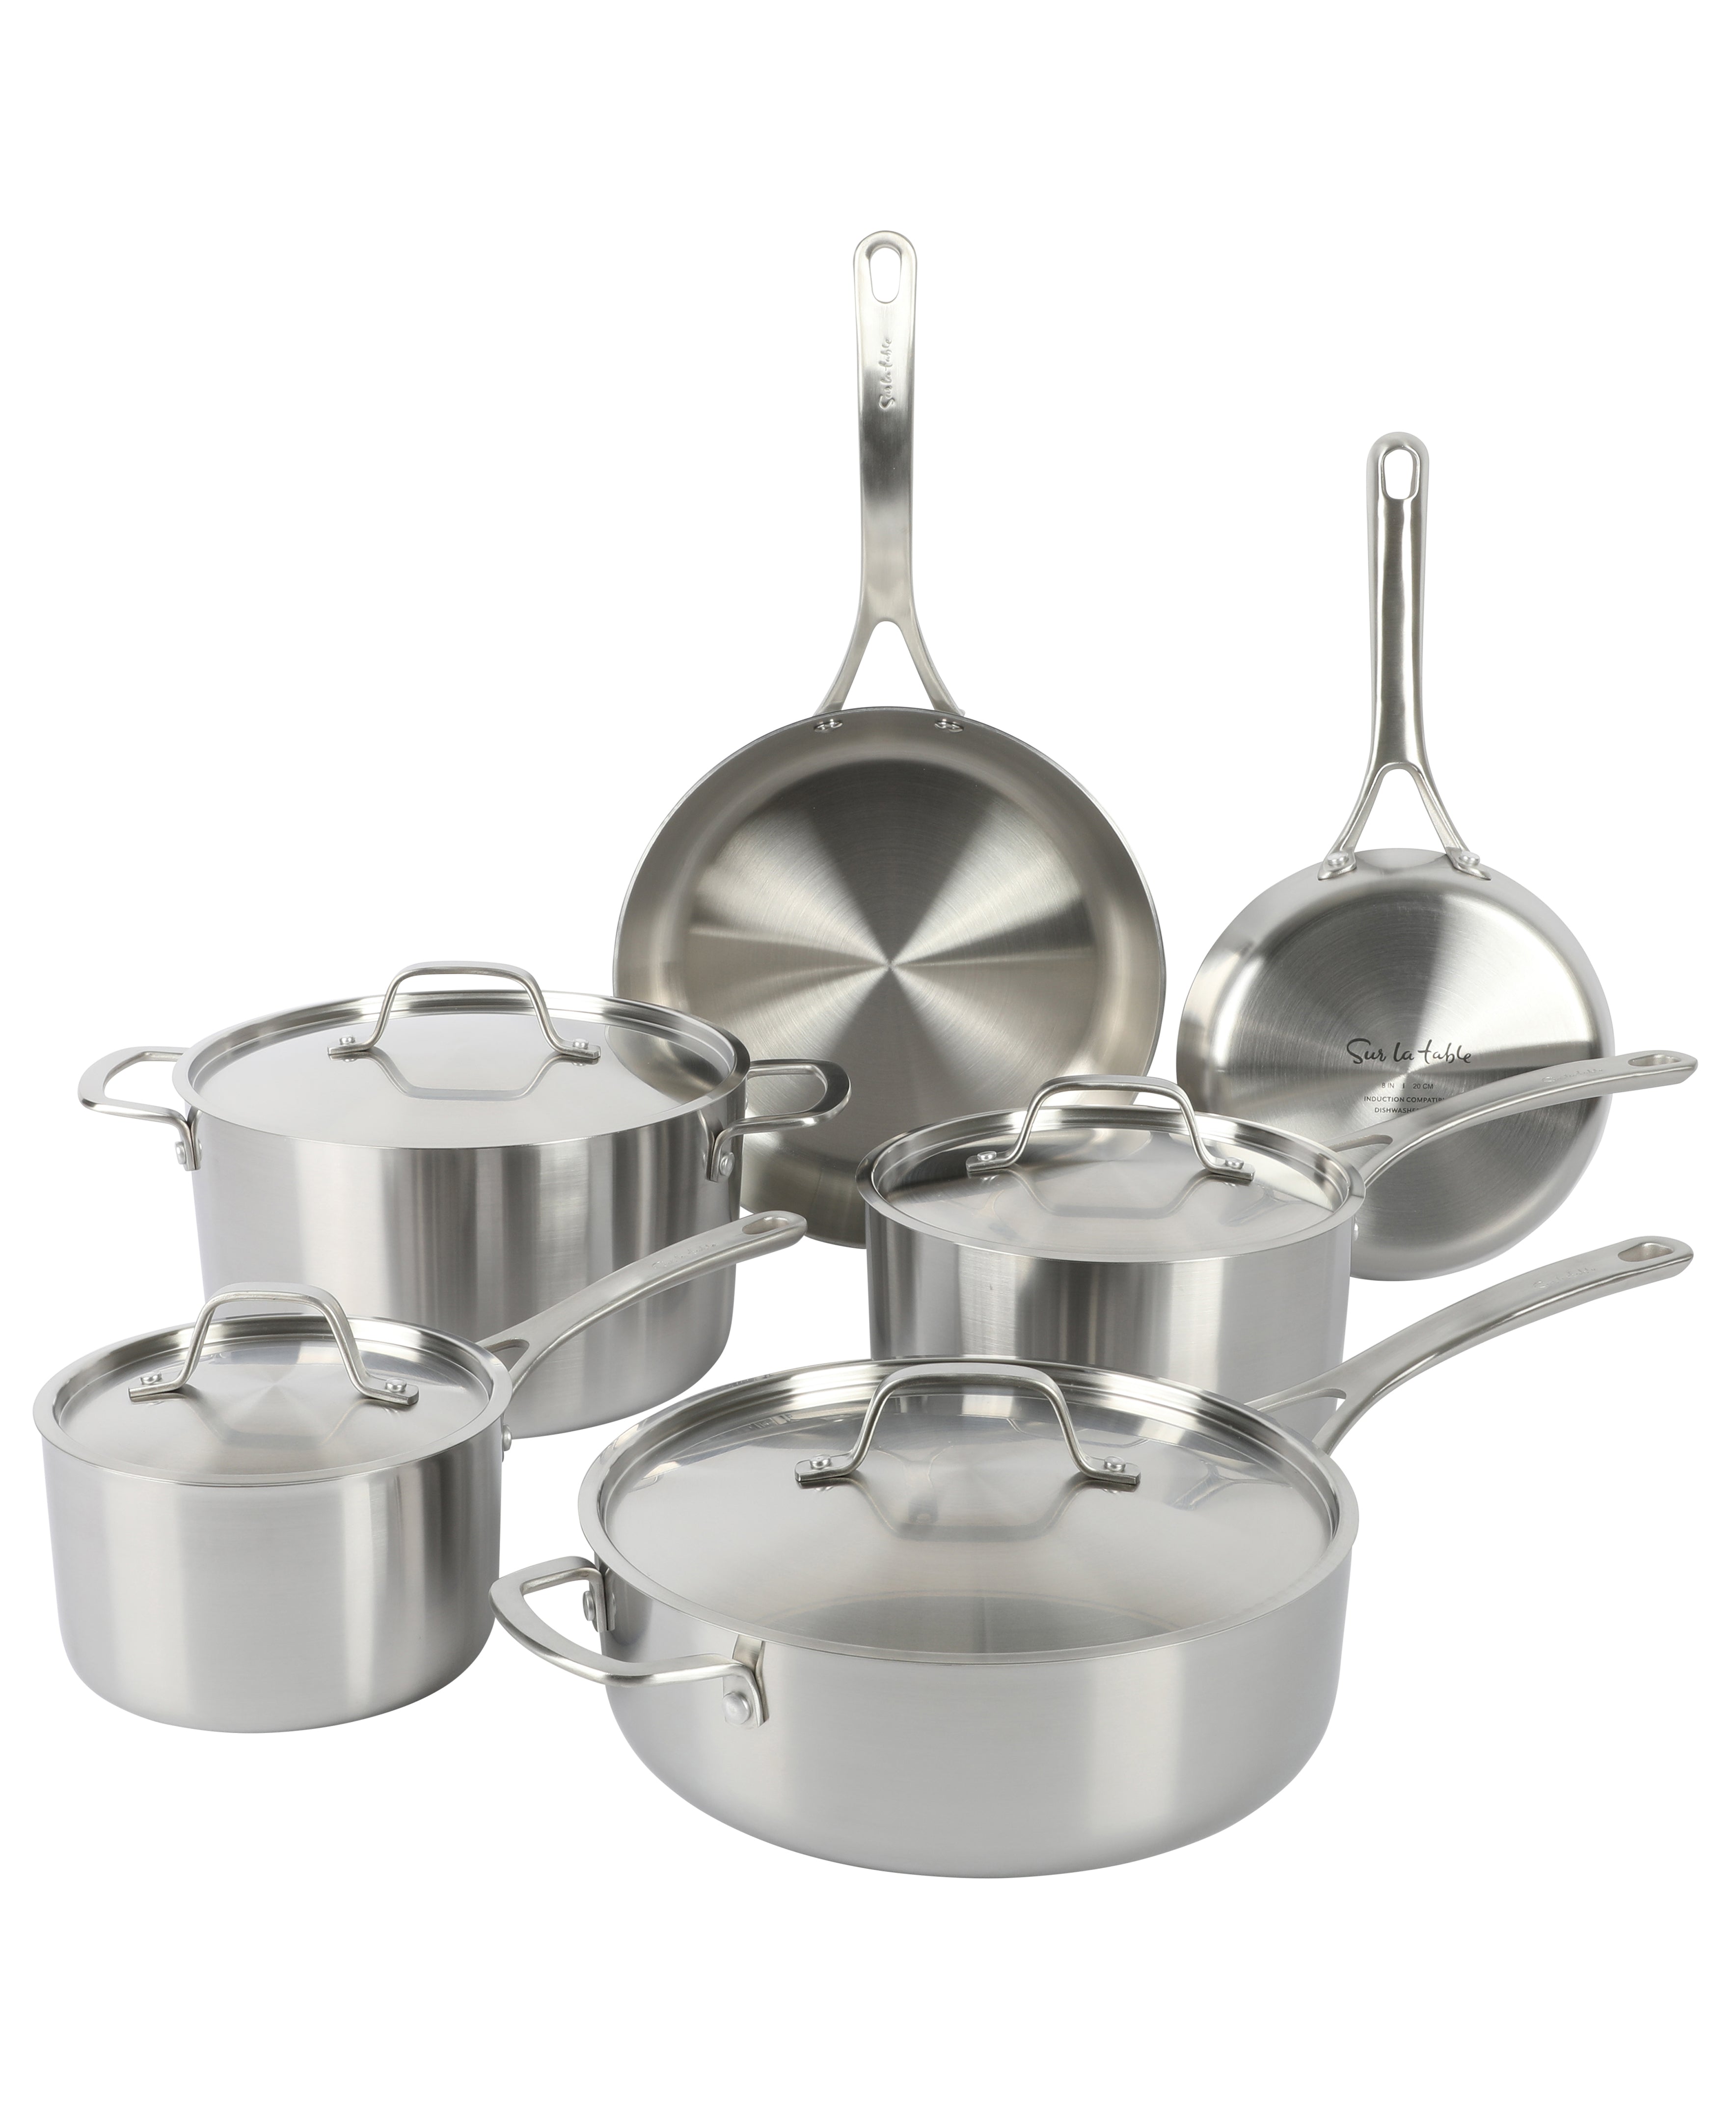 Premium Cookware Set | 13-Pieces | Non Stick, Stainless Steel, Carbon Steel | Made in